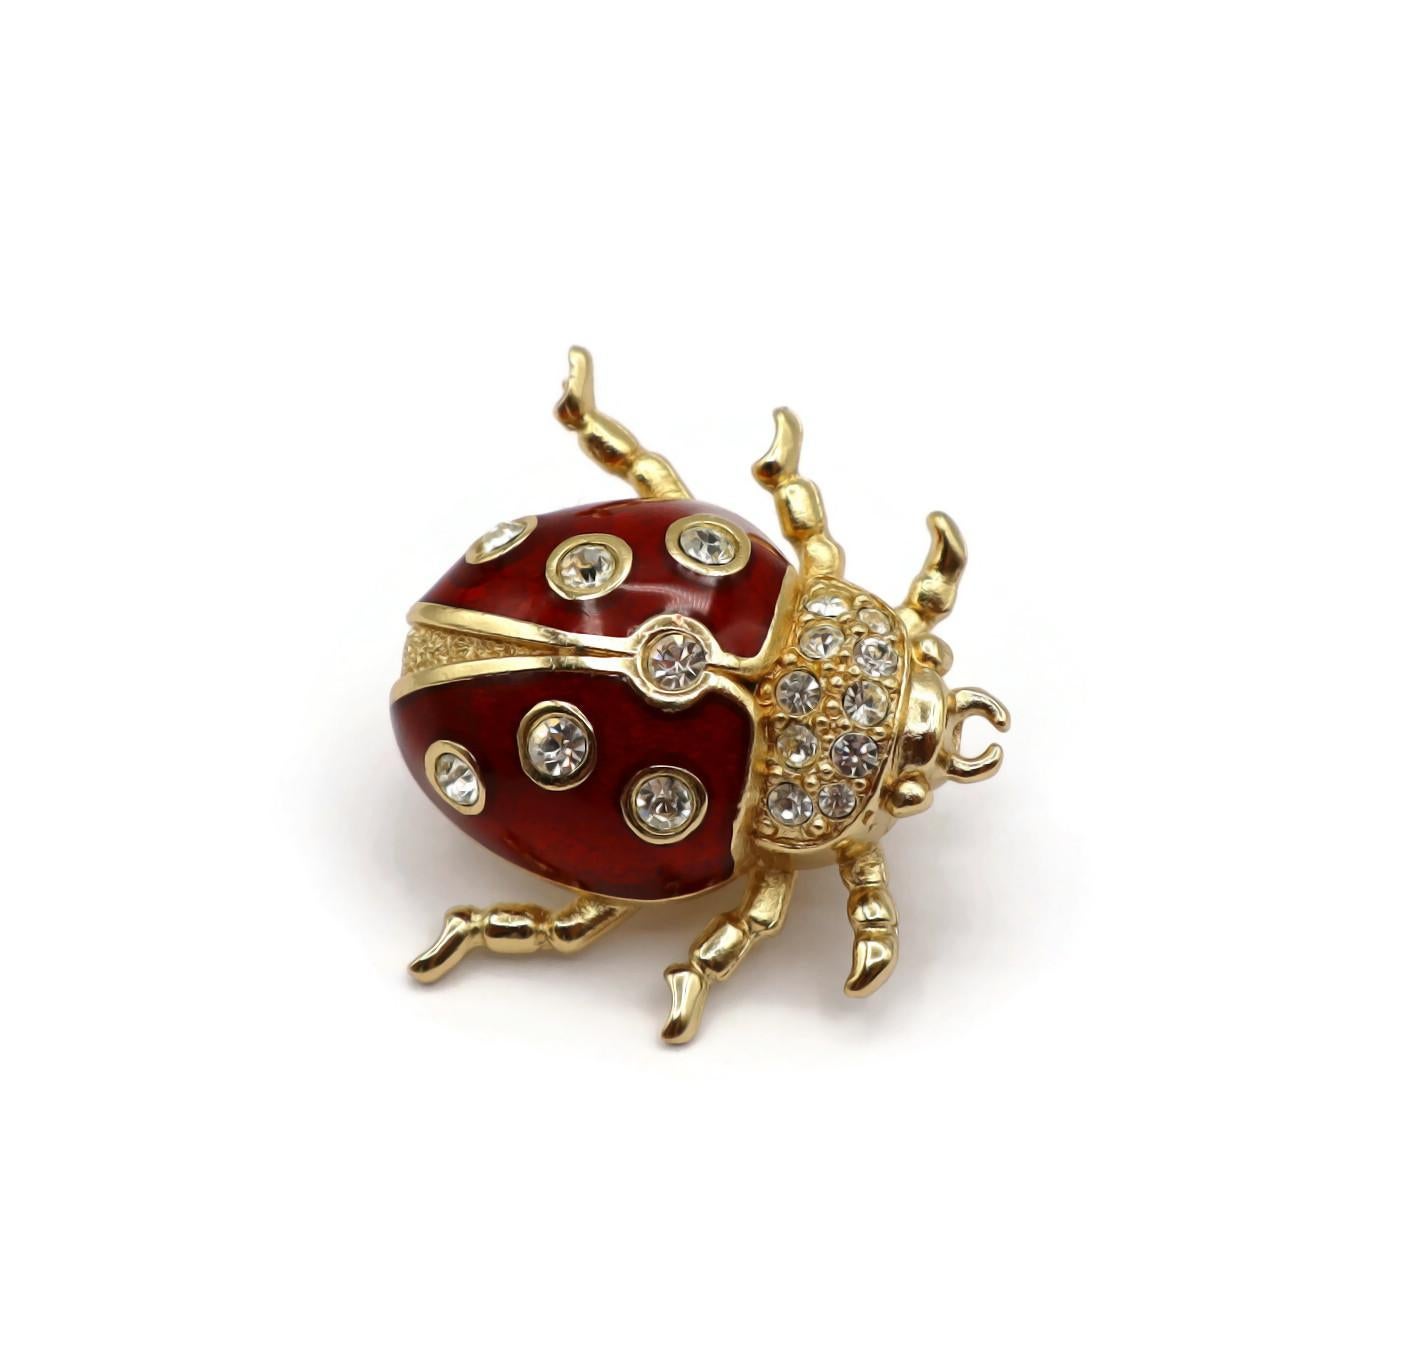 CHRISTIAN DIOR Vintage Jewelled Ladybug Pin Brooch In Good Condition For Sale In Nice, FR